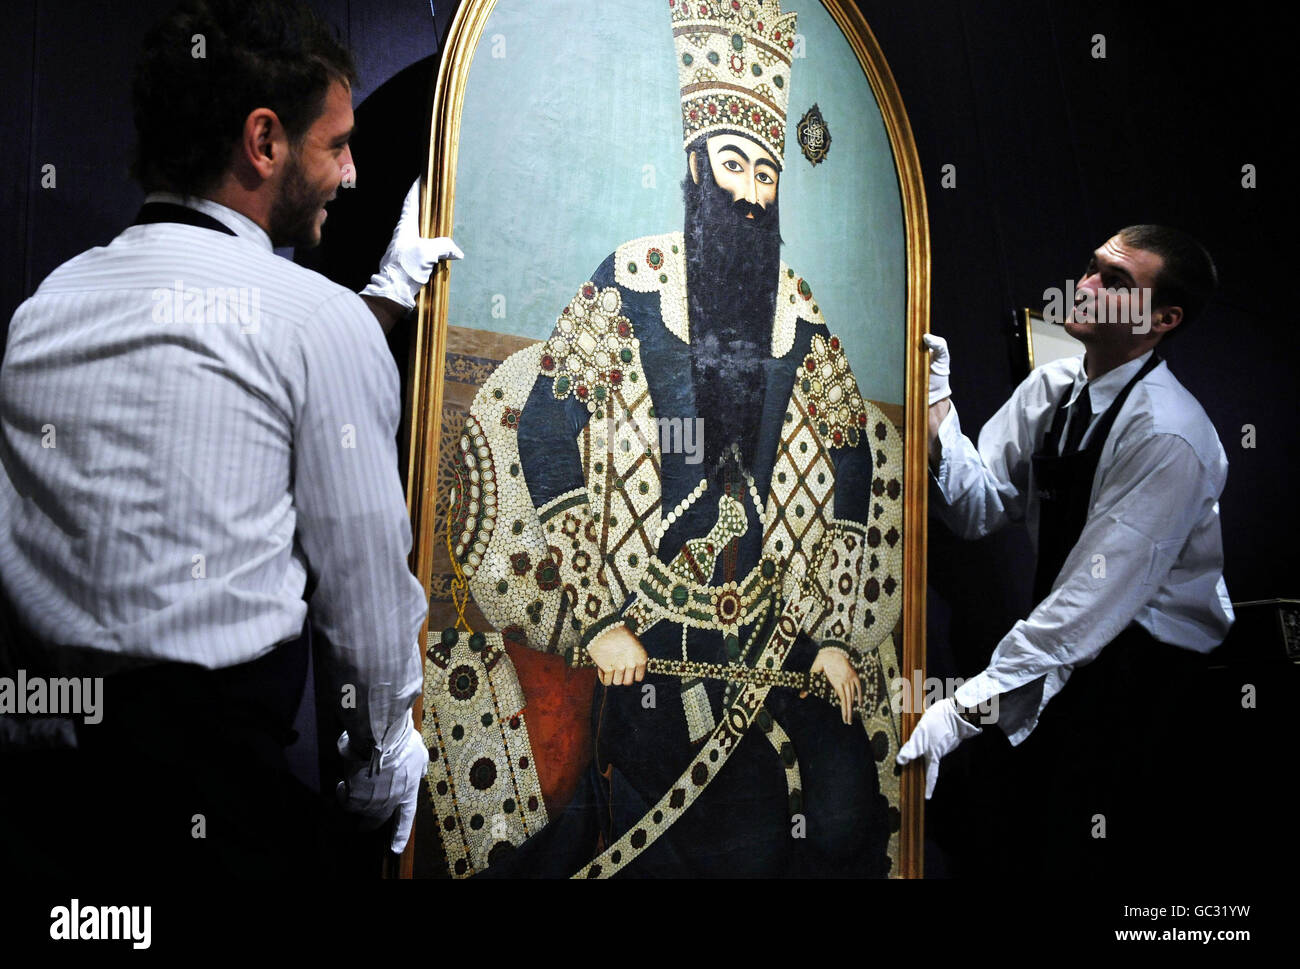 Sotheby's technicians in London handle a portrait of Iranian monarch Fath 'Ali Shah Qajar, estimated at250,000 to 350,000 at the auctioneer's sale Arts of the Islamic World, which is to take place on October 7. Stock Photo